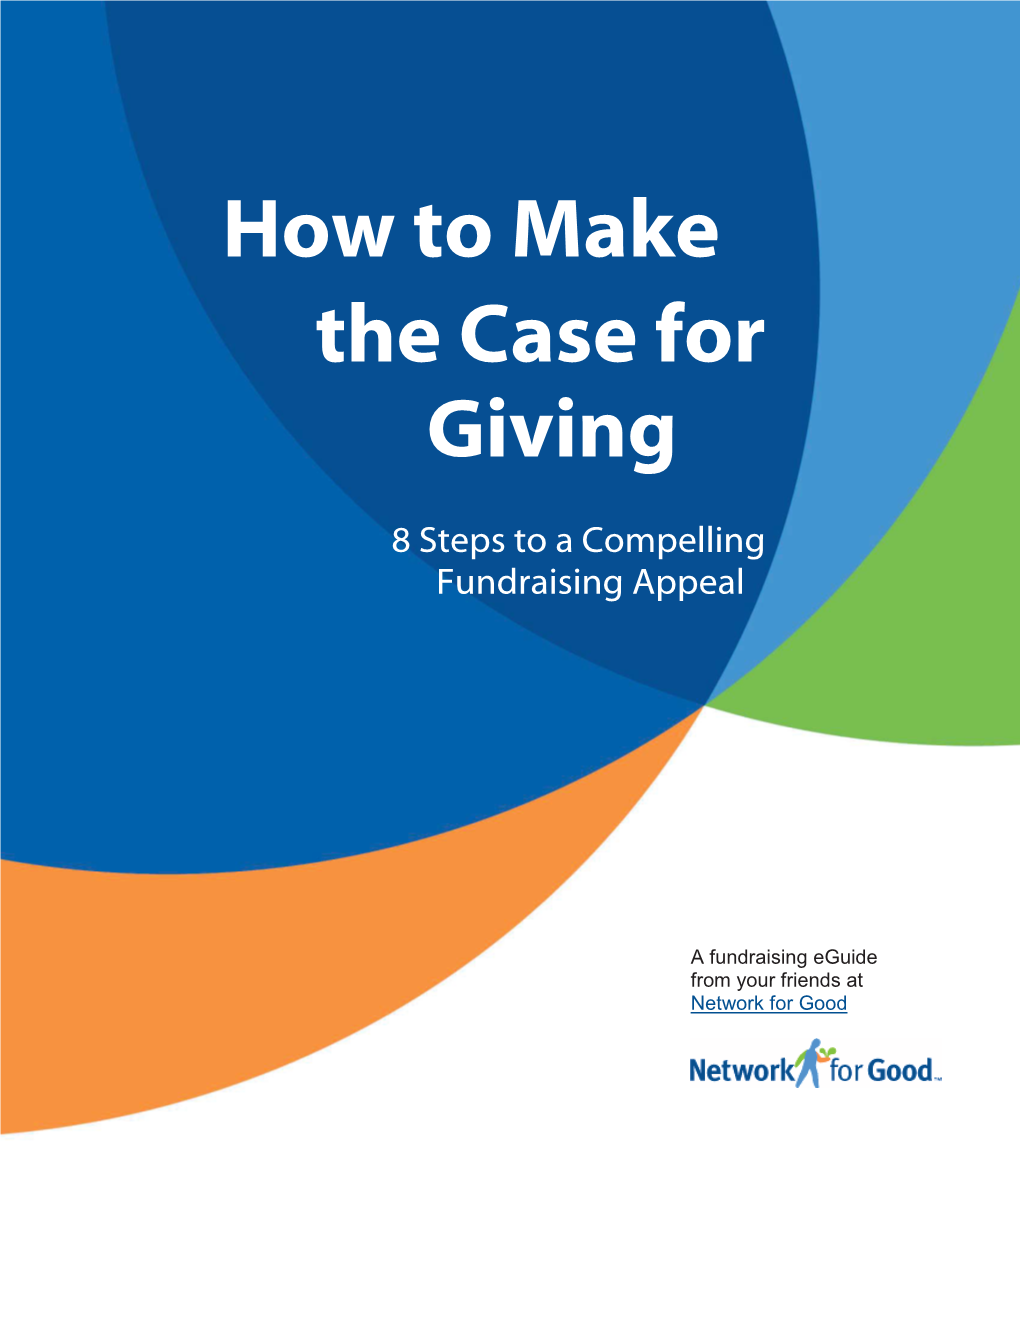 How to Make the Case for Giving